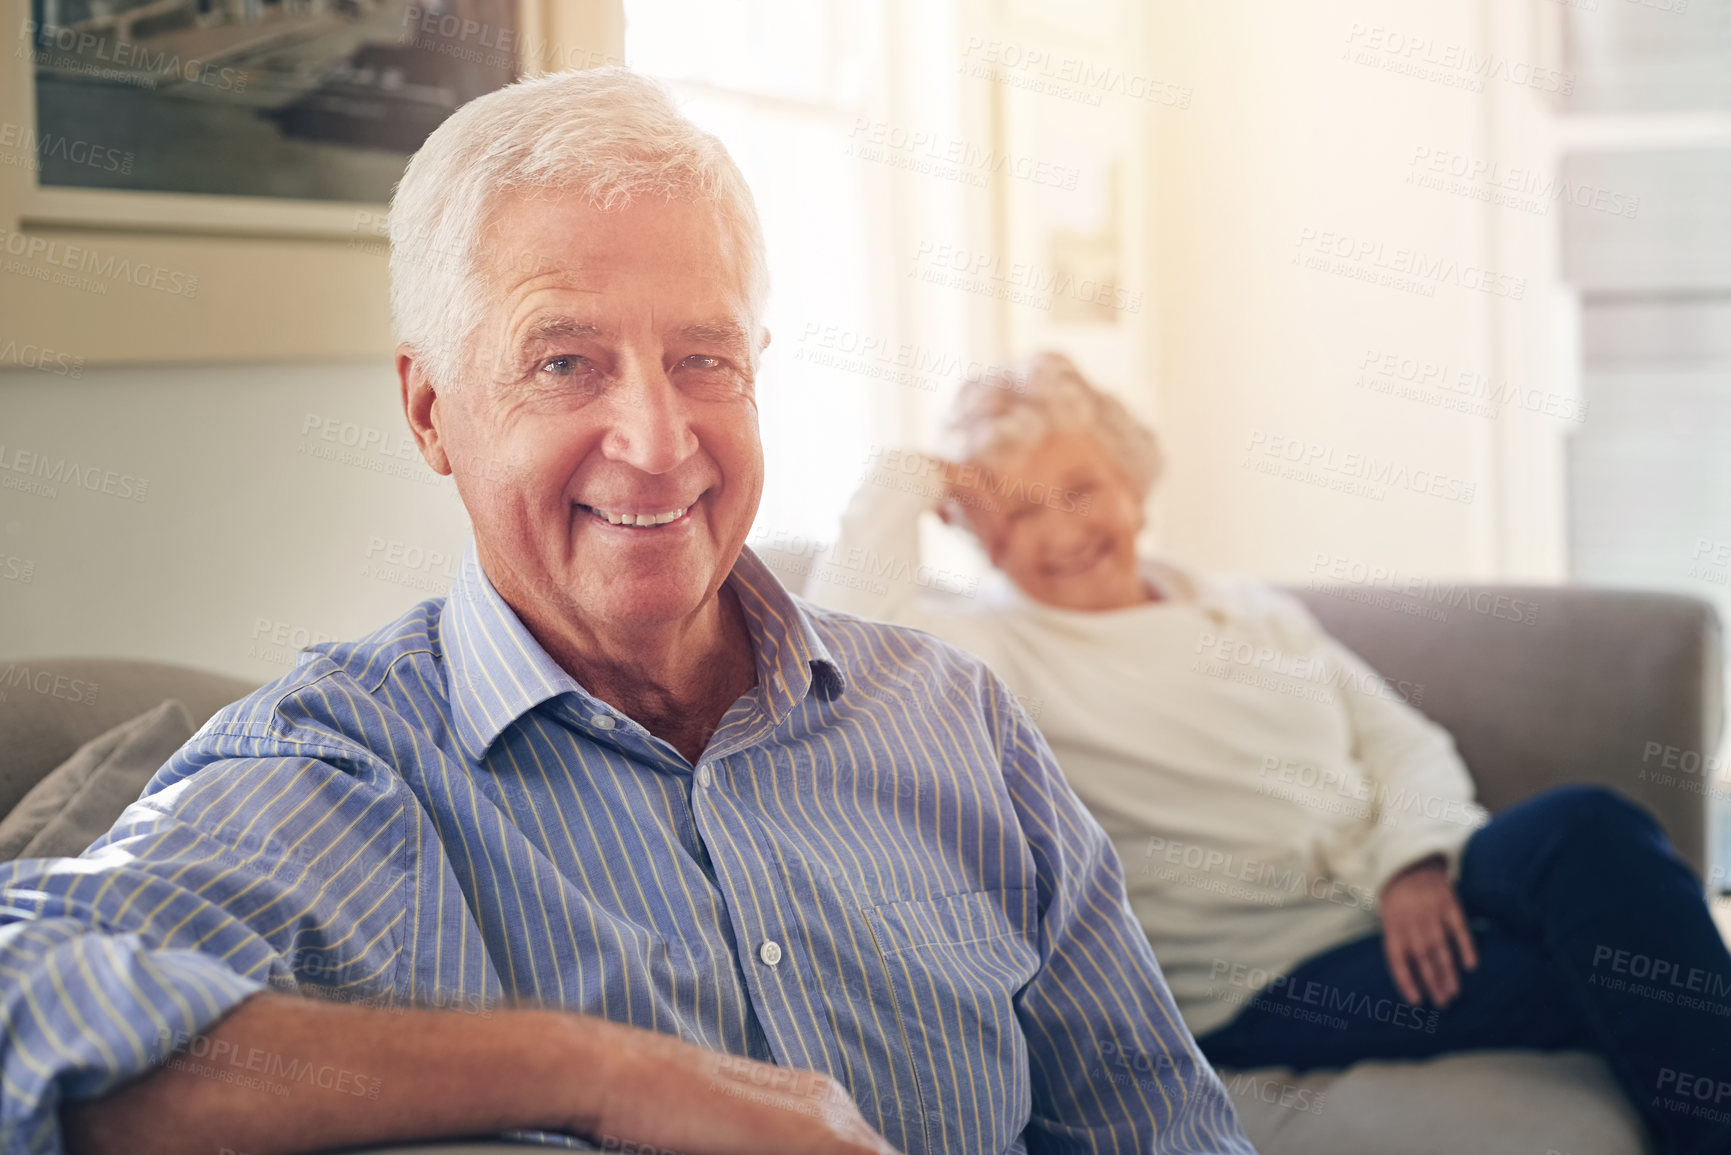 Buy stock photo Portrait of a senior man relaxing at home with his wife in the background